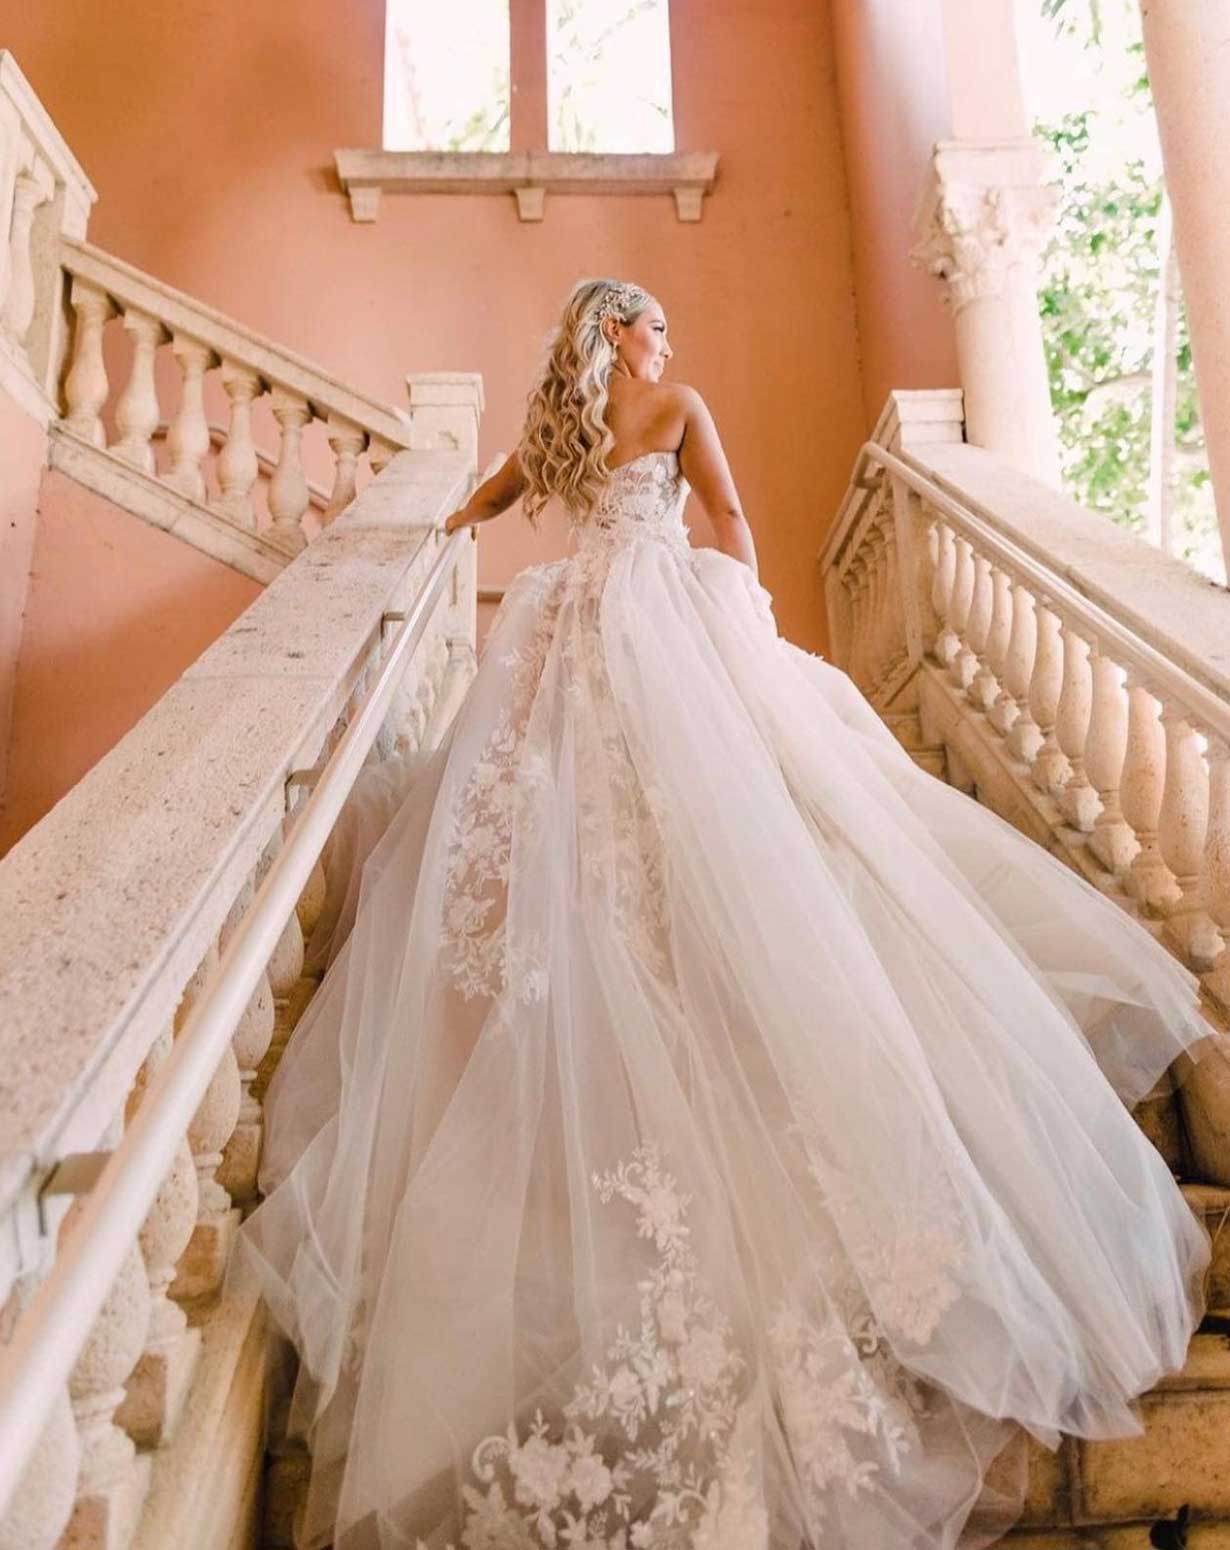 https://www.bocaratonbridal.com/Themes/BocaRatonBridal/Content/img/home/featured-intro1.jpg